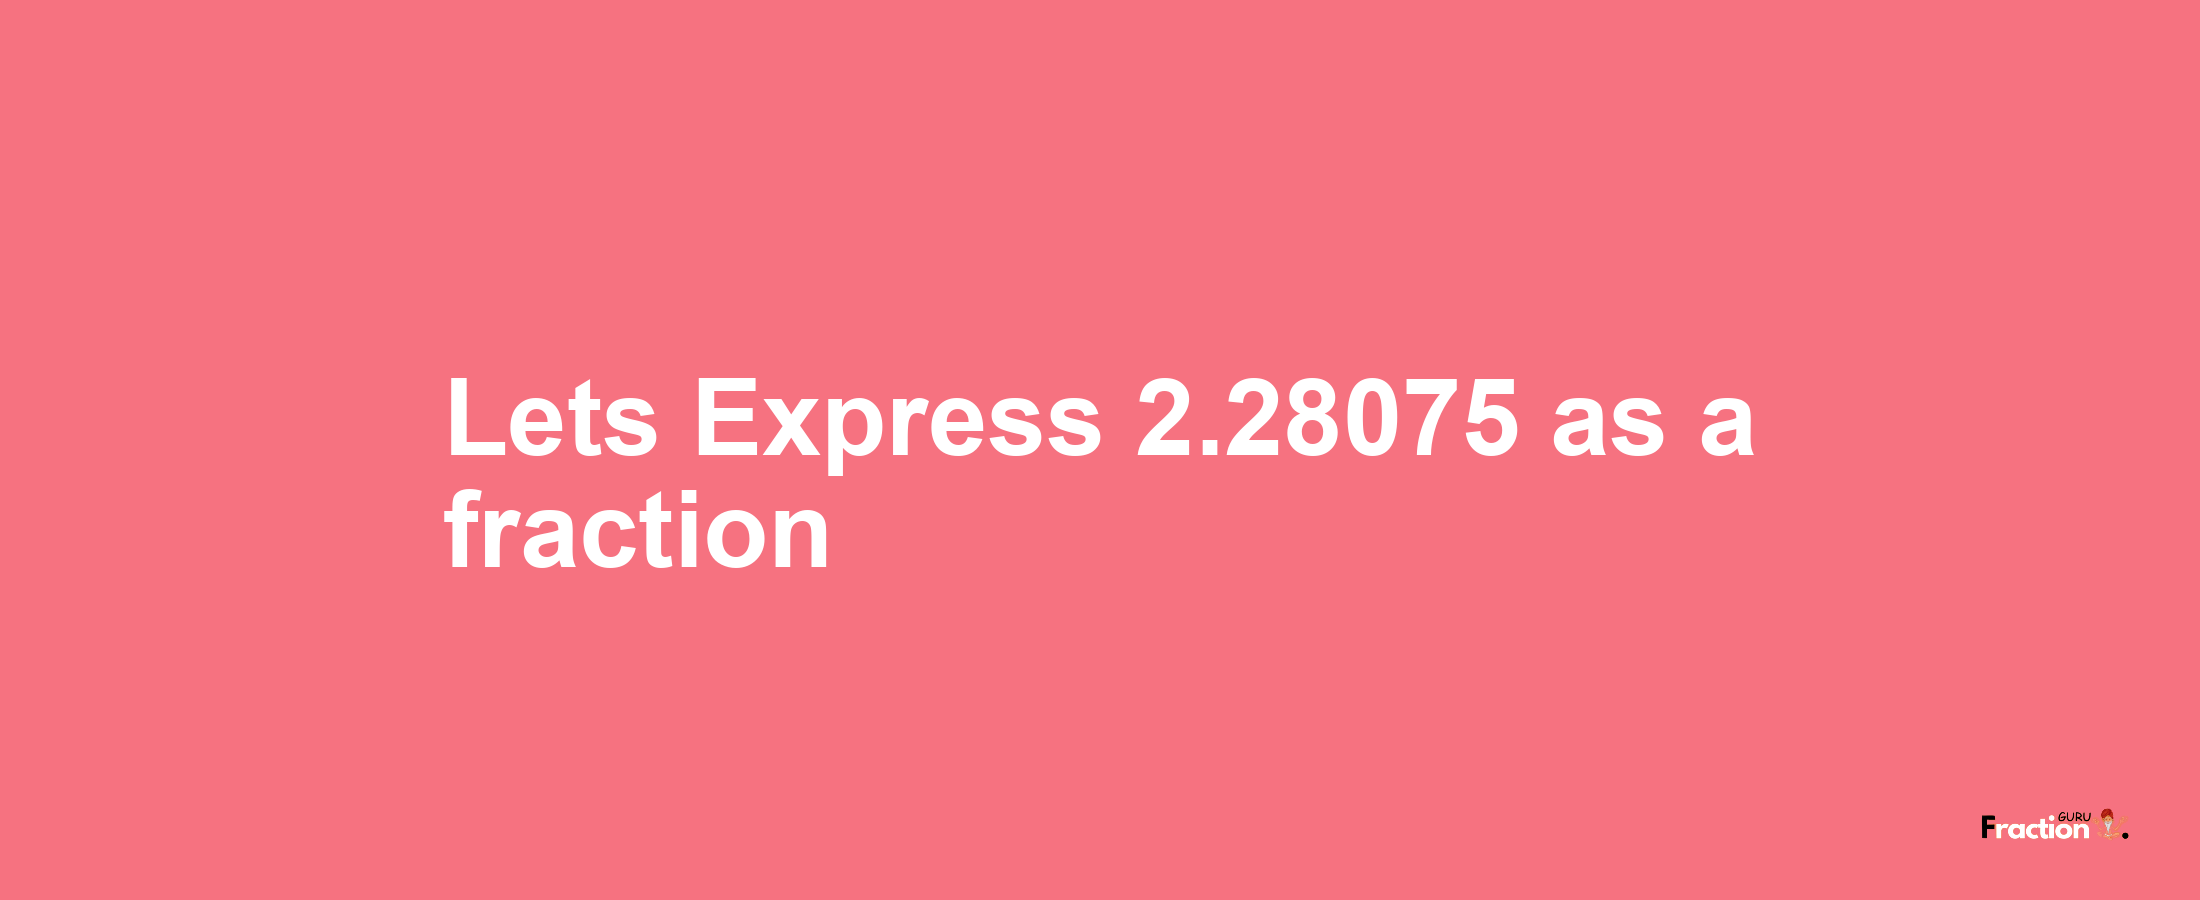 Lets Express 2.28075 as afraction